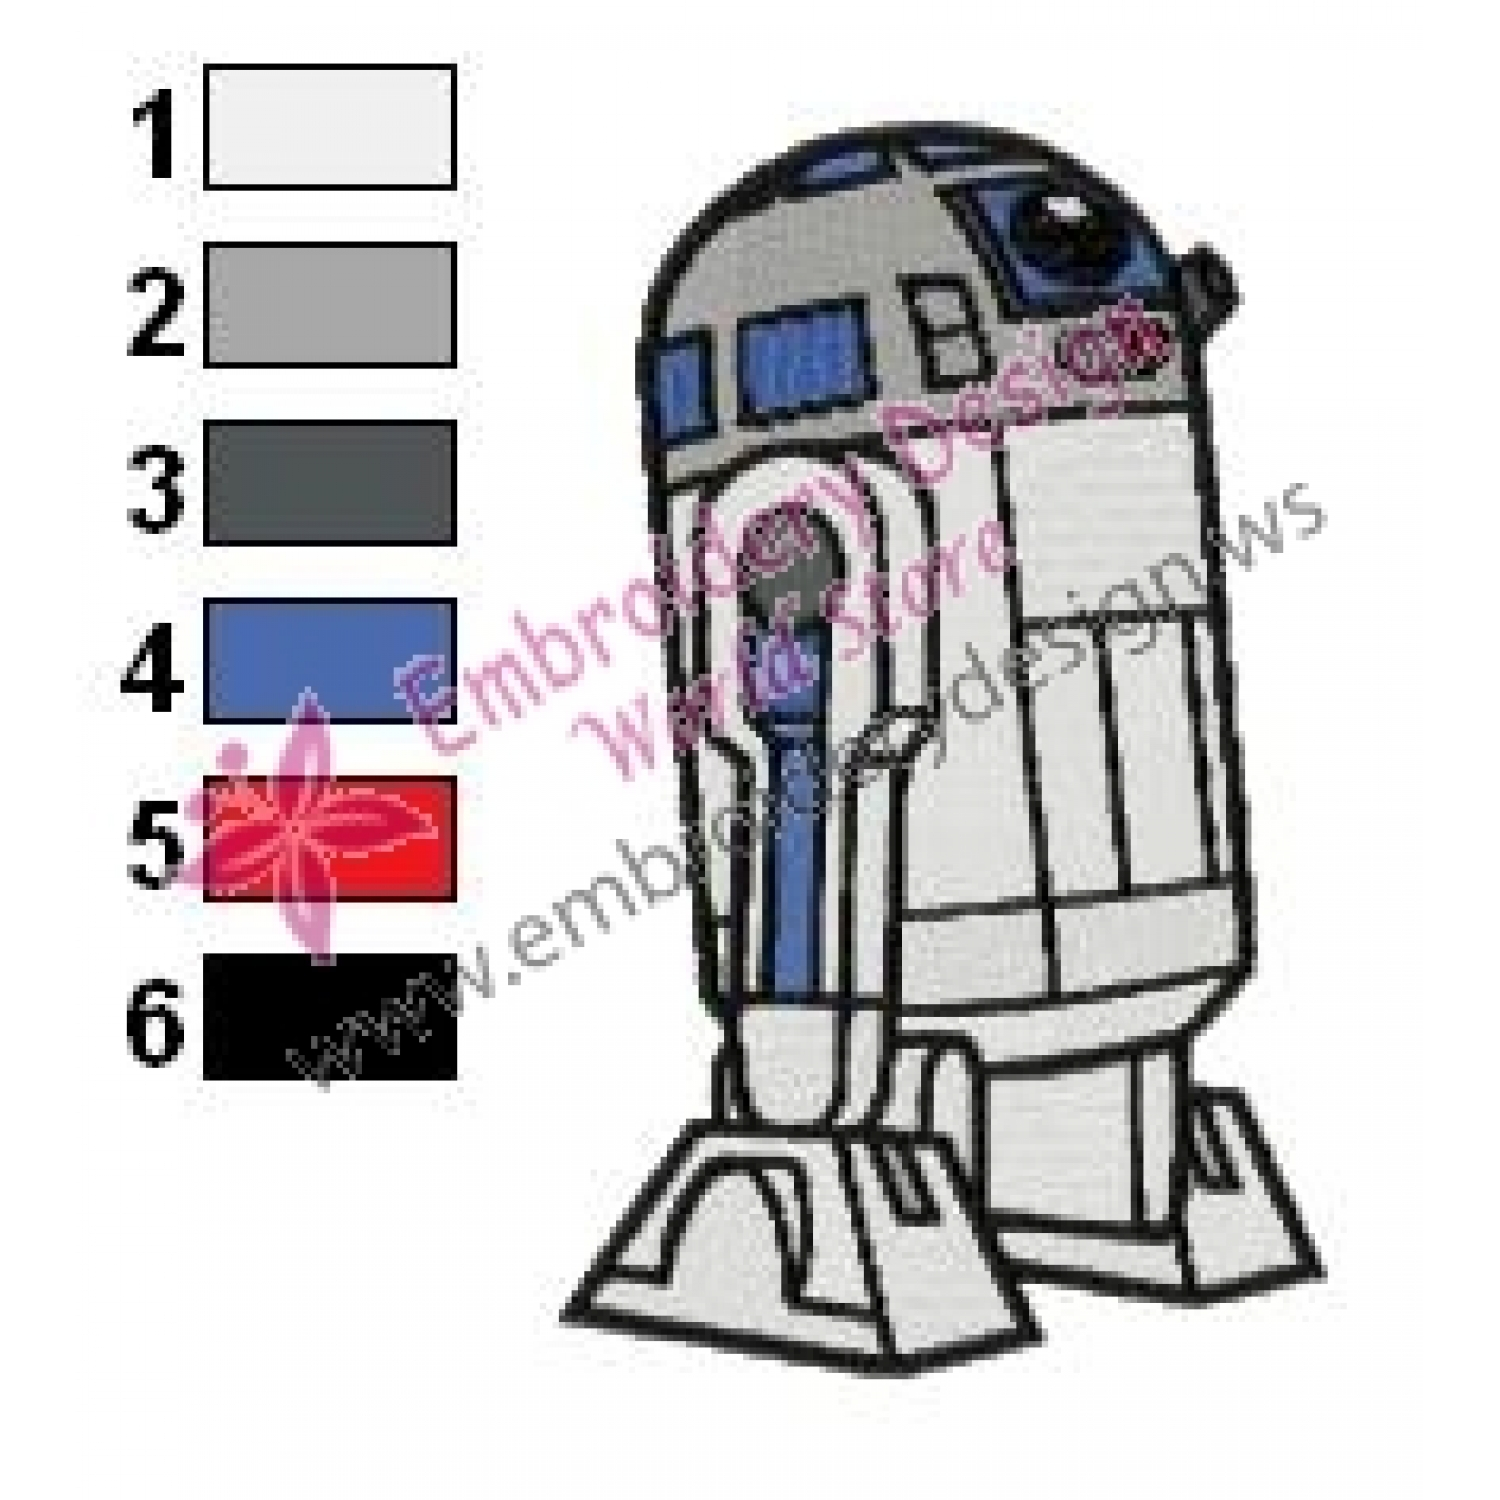 Star Wars Embroidery Pattern Star Wars Embroidery Designs